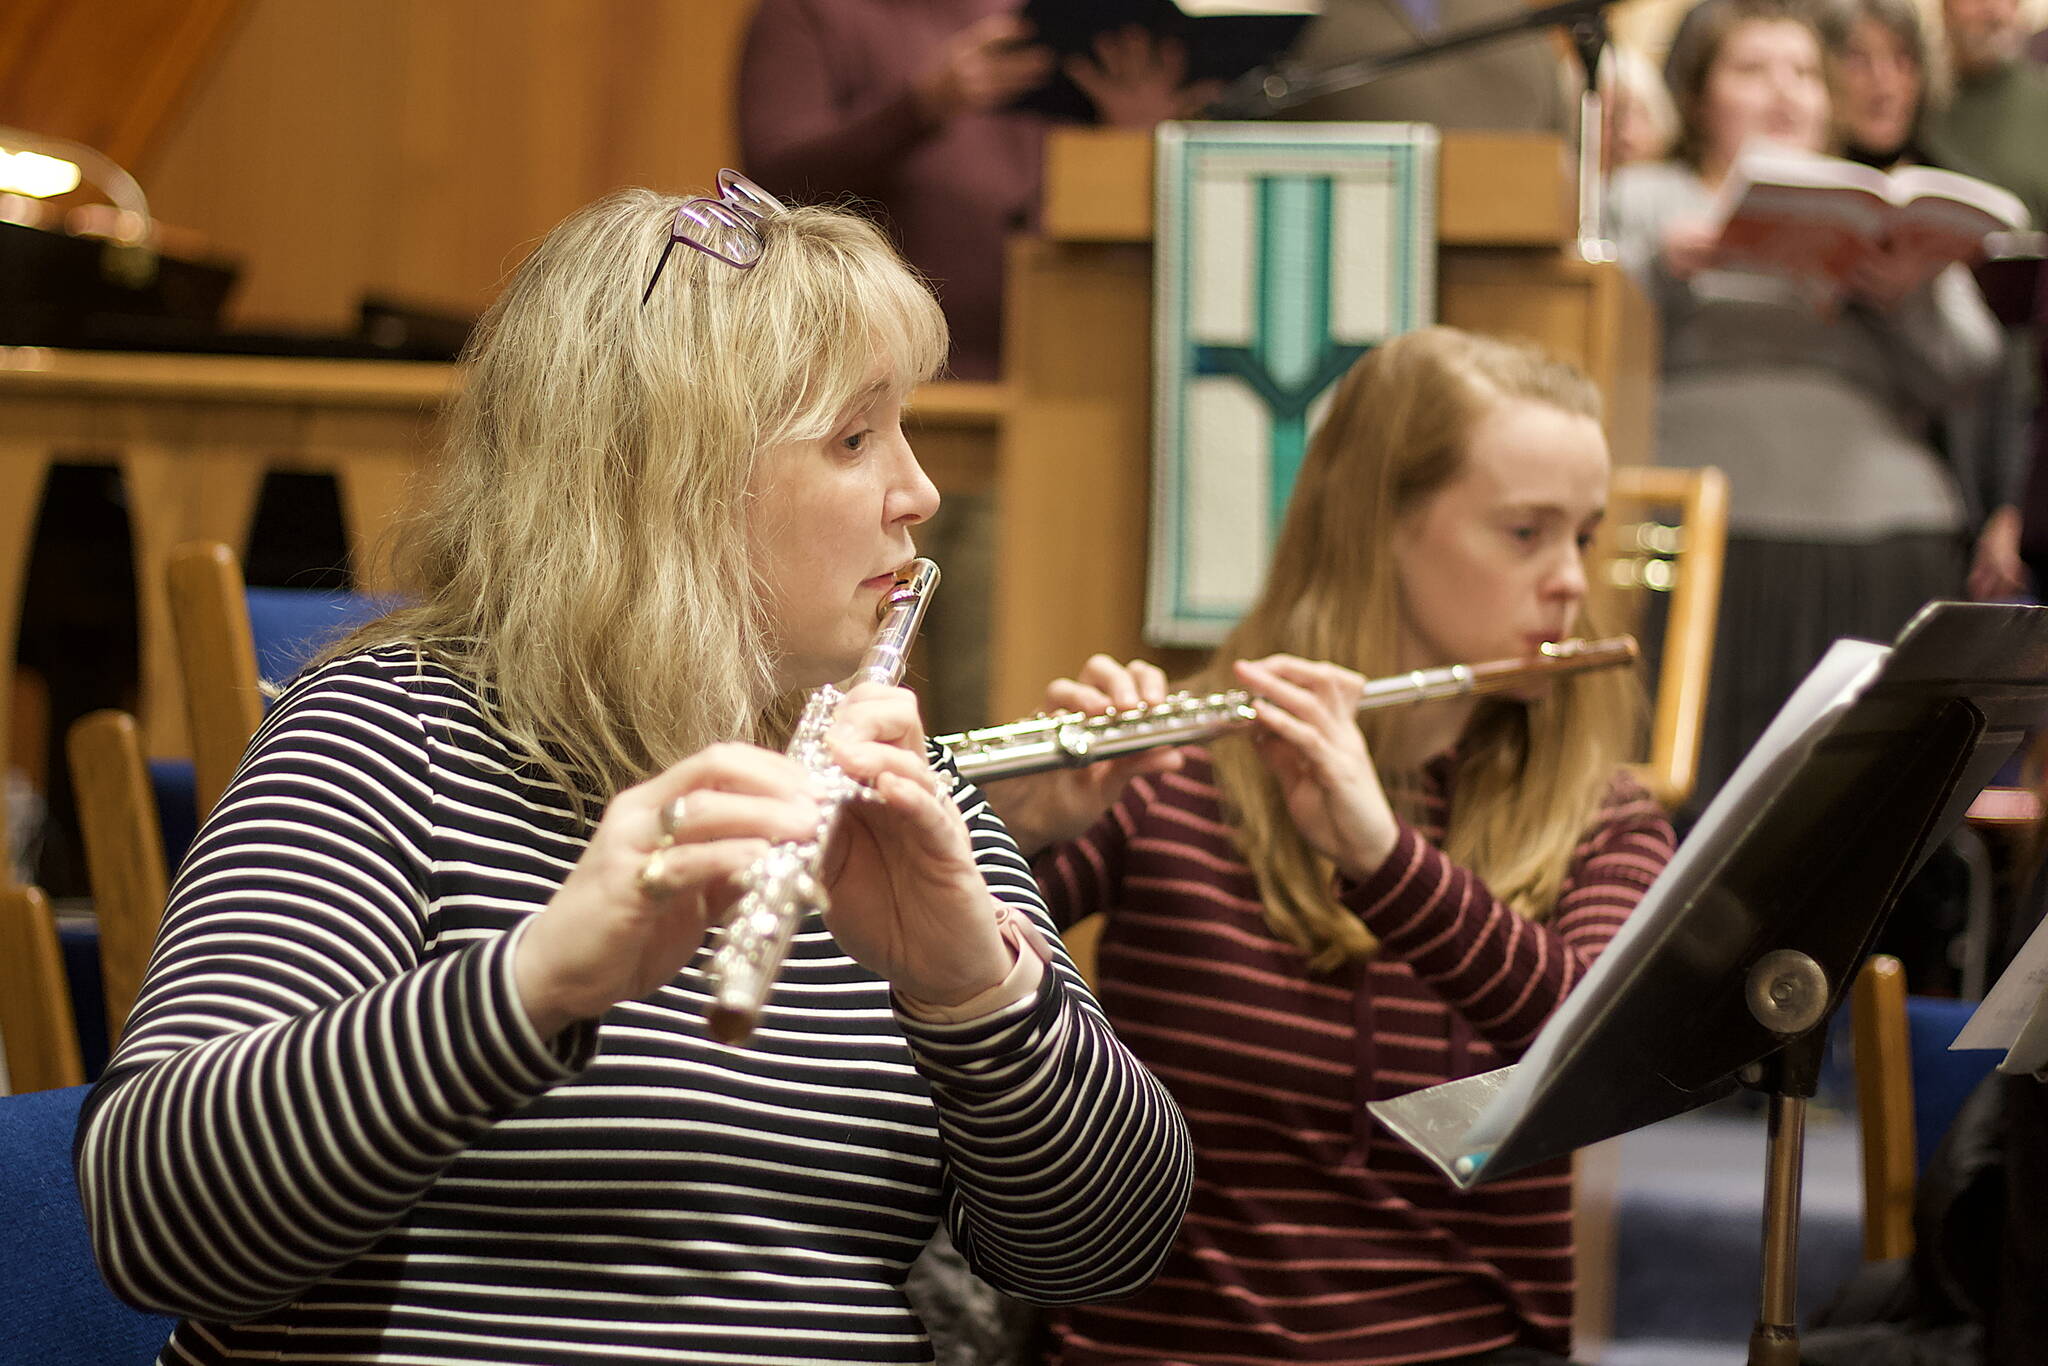 Colleen Torrence (left) and Inga White use flutes to play portions of Handel’s “Messiah” traditionally played by violins in a re-orchestration of the oratorio scheduled to be performed at Ḵunéix̱ Hídi Northern Light United Church at 7 p.m. Saturday and 3 p.m. Sunday. (Mark Sabbatini / Juneau Empire)